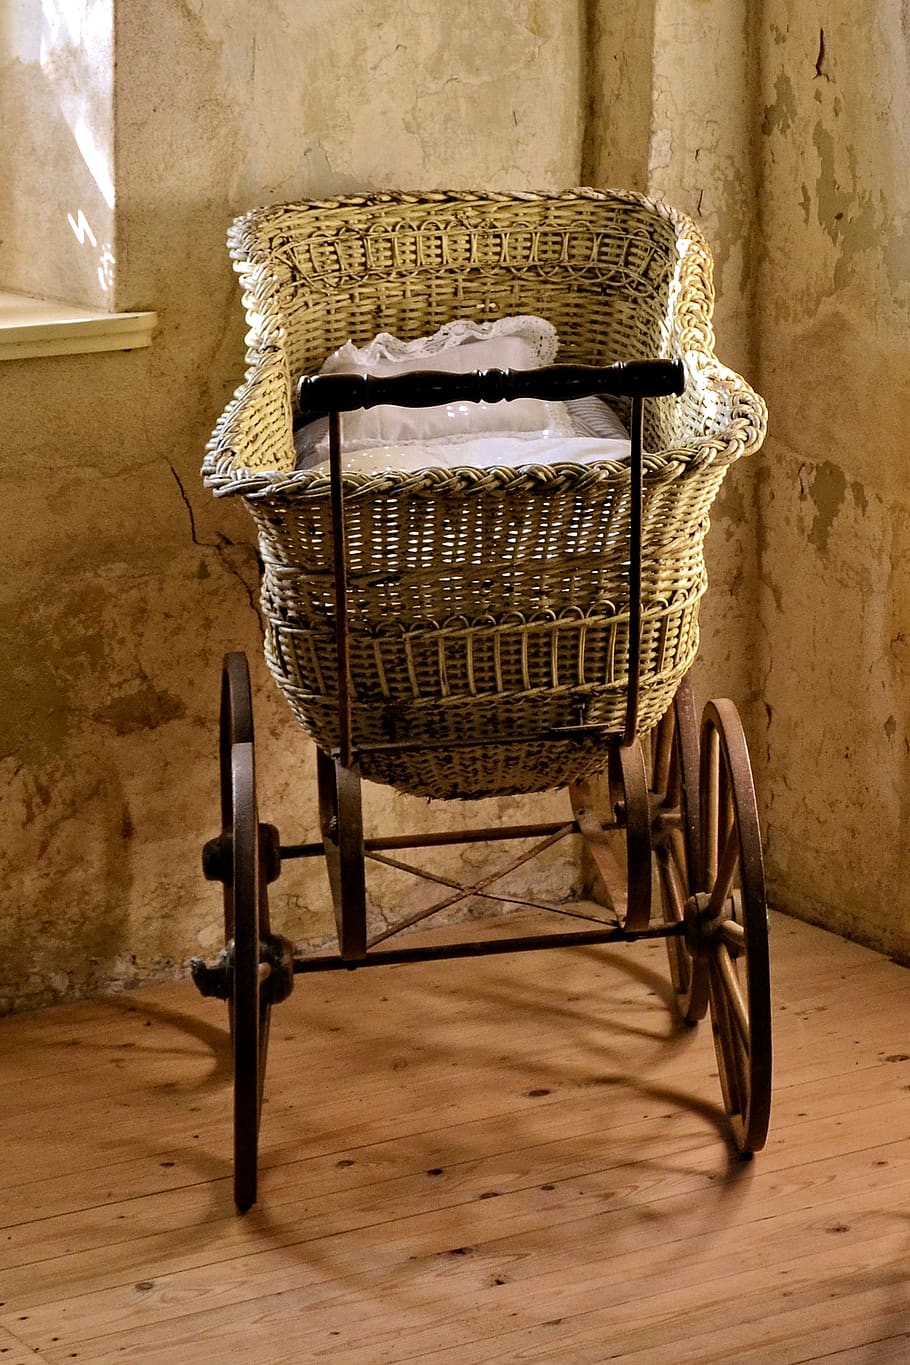 baby carriage, old, historically, bassinet, klöden burg, chair, indoors, wood - material, seat, wall - building feature